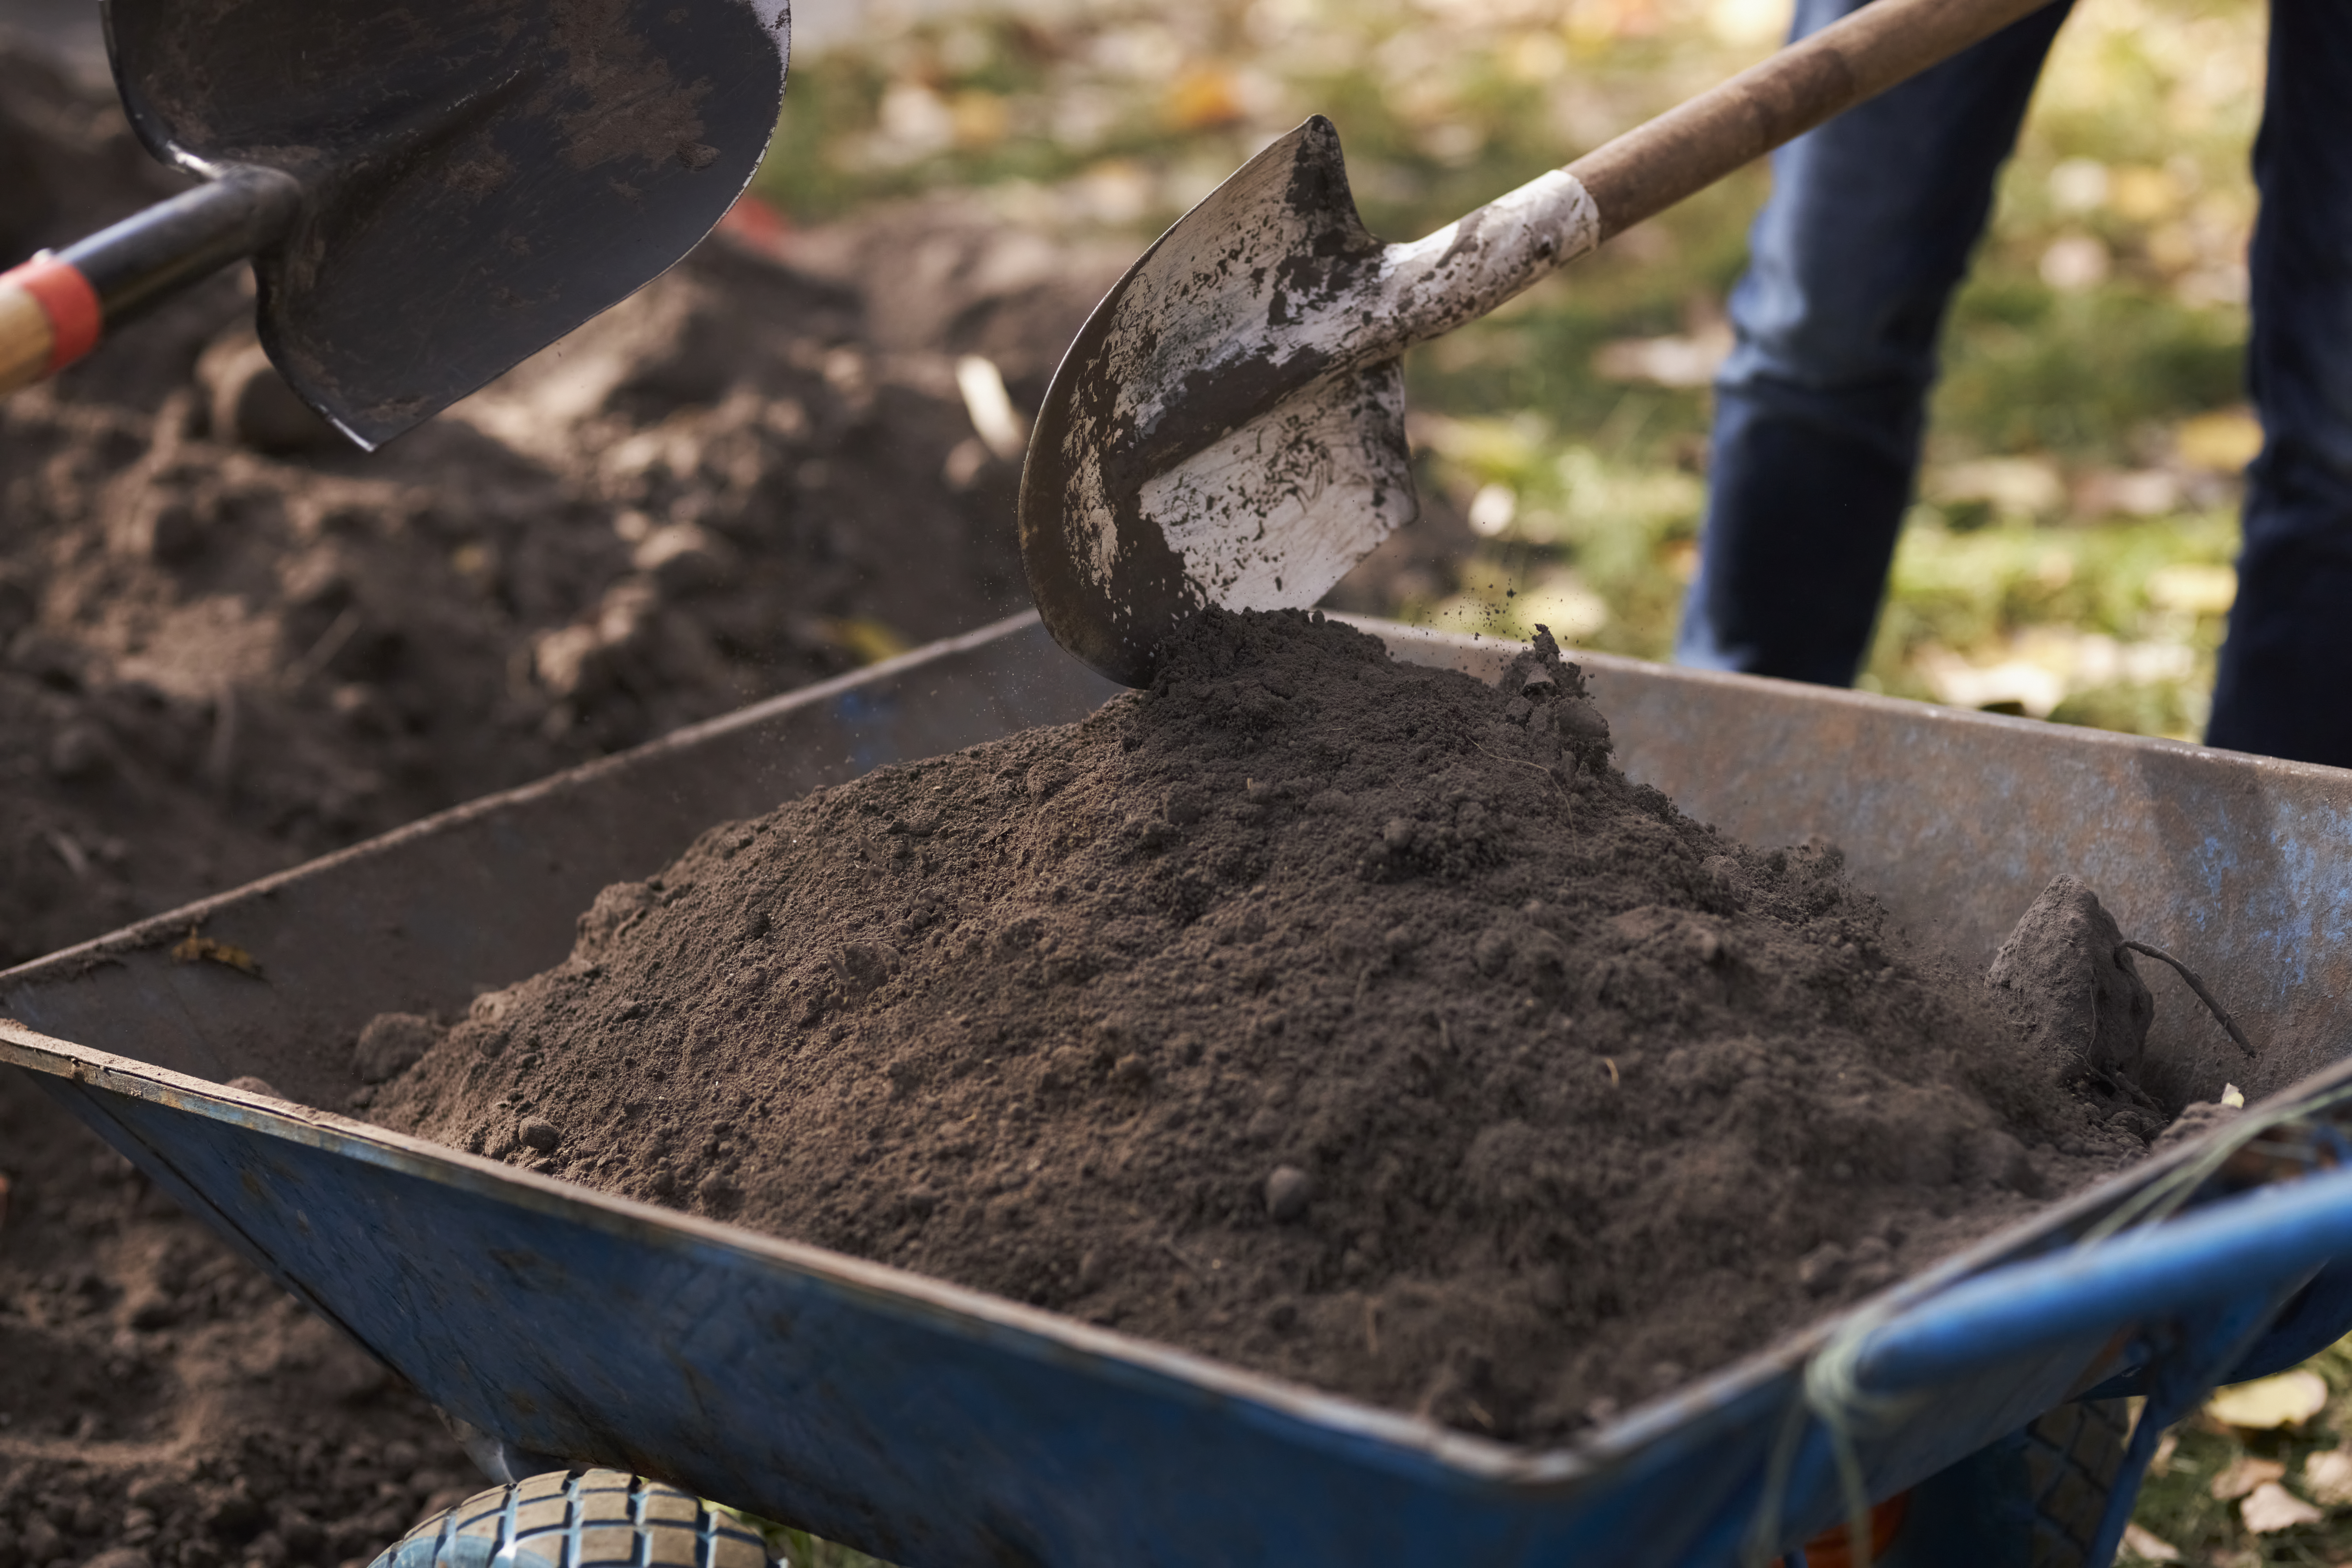 A wheelbarrow is seen nearly full of topsoil. Two spades are seen in the background alongside a pile of topsoil waiting to be loaded and removed by The Best landscapers in Ottawa.